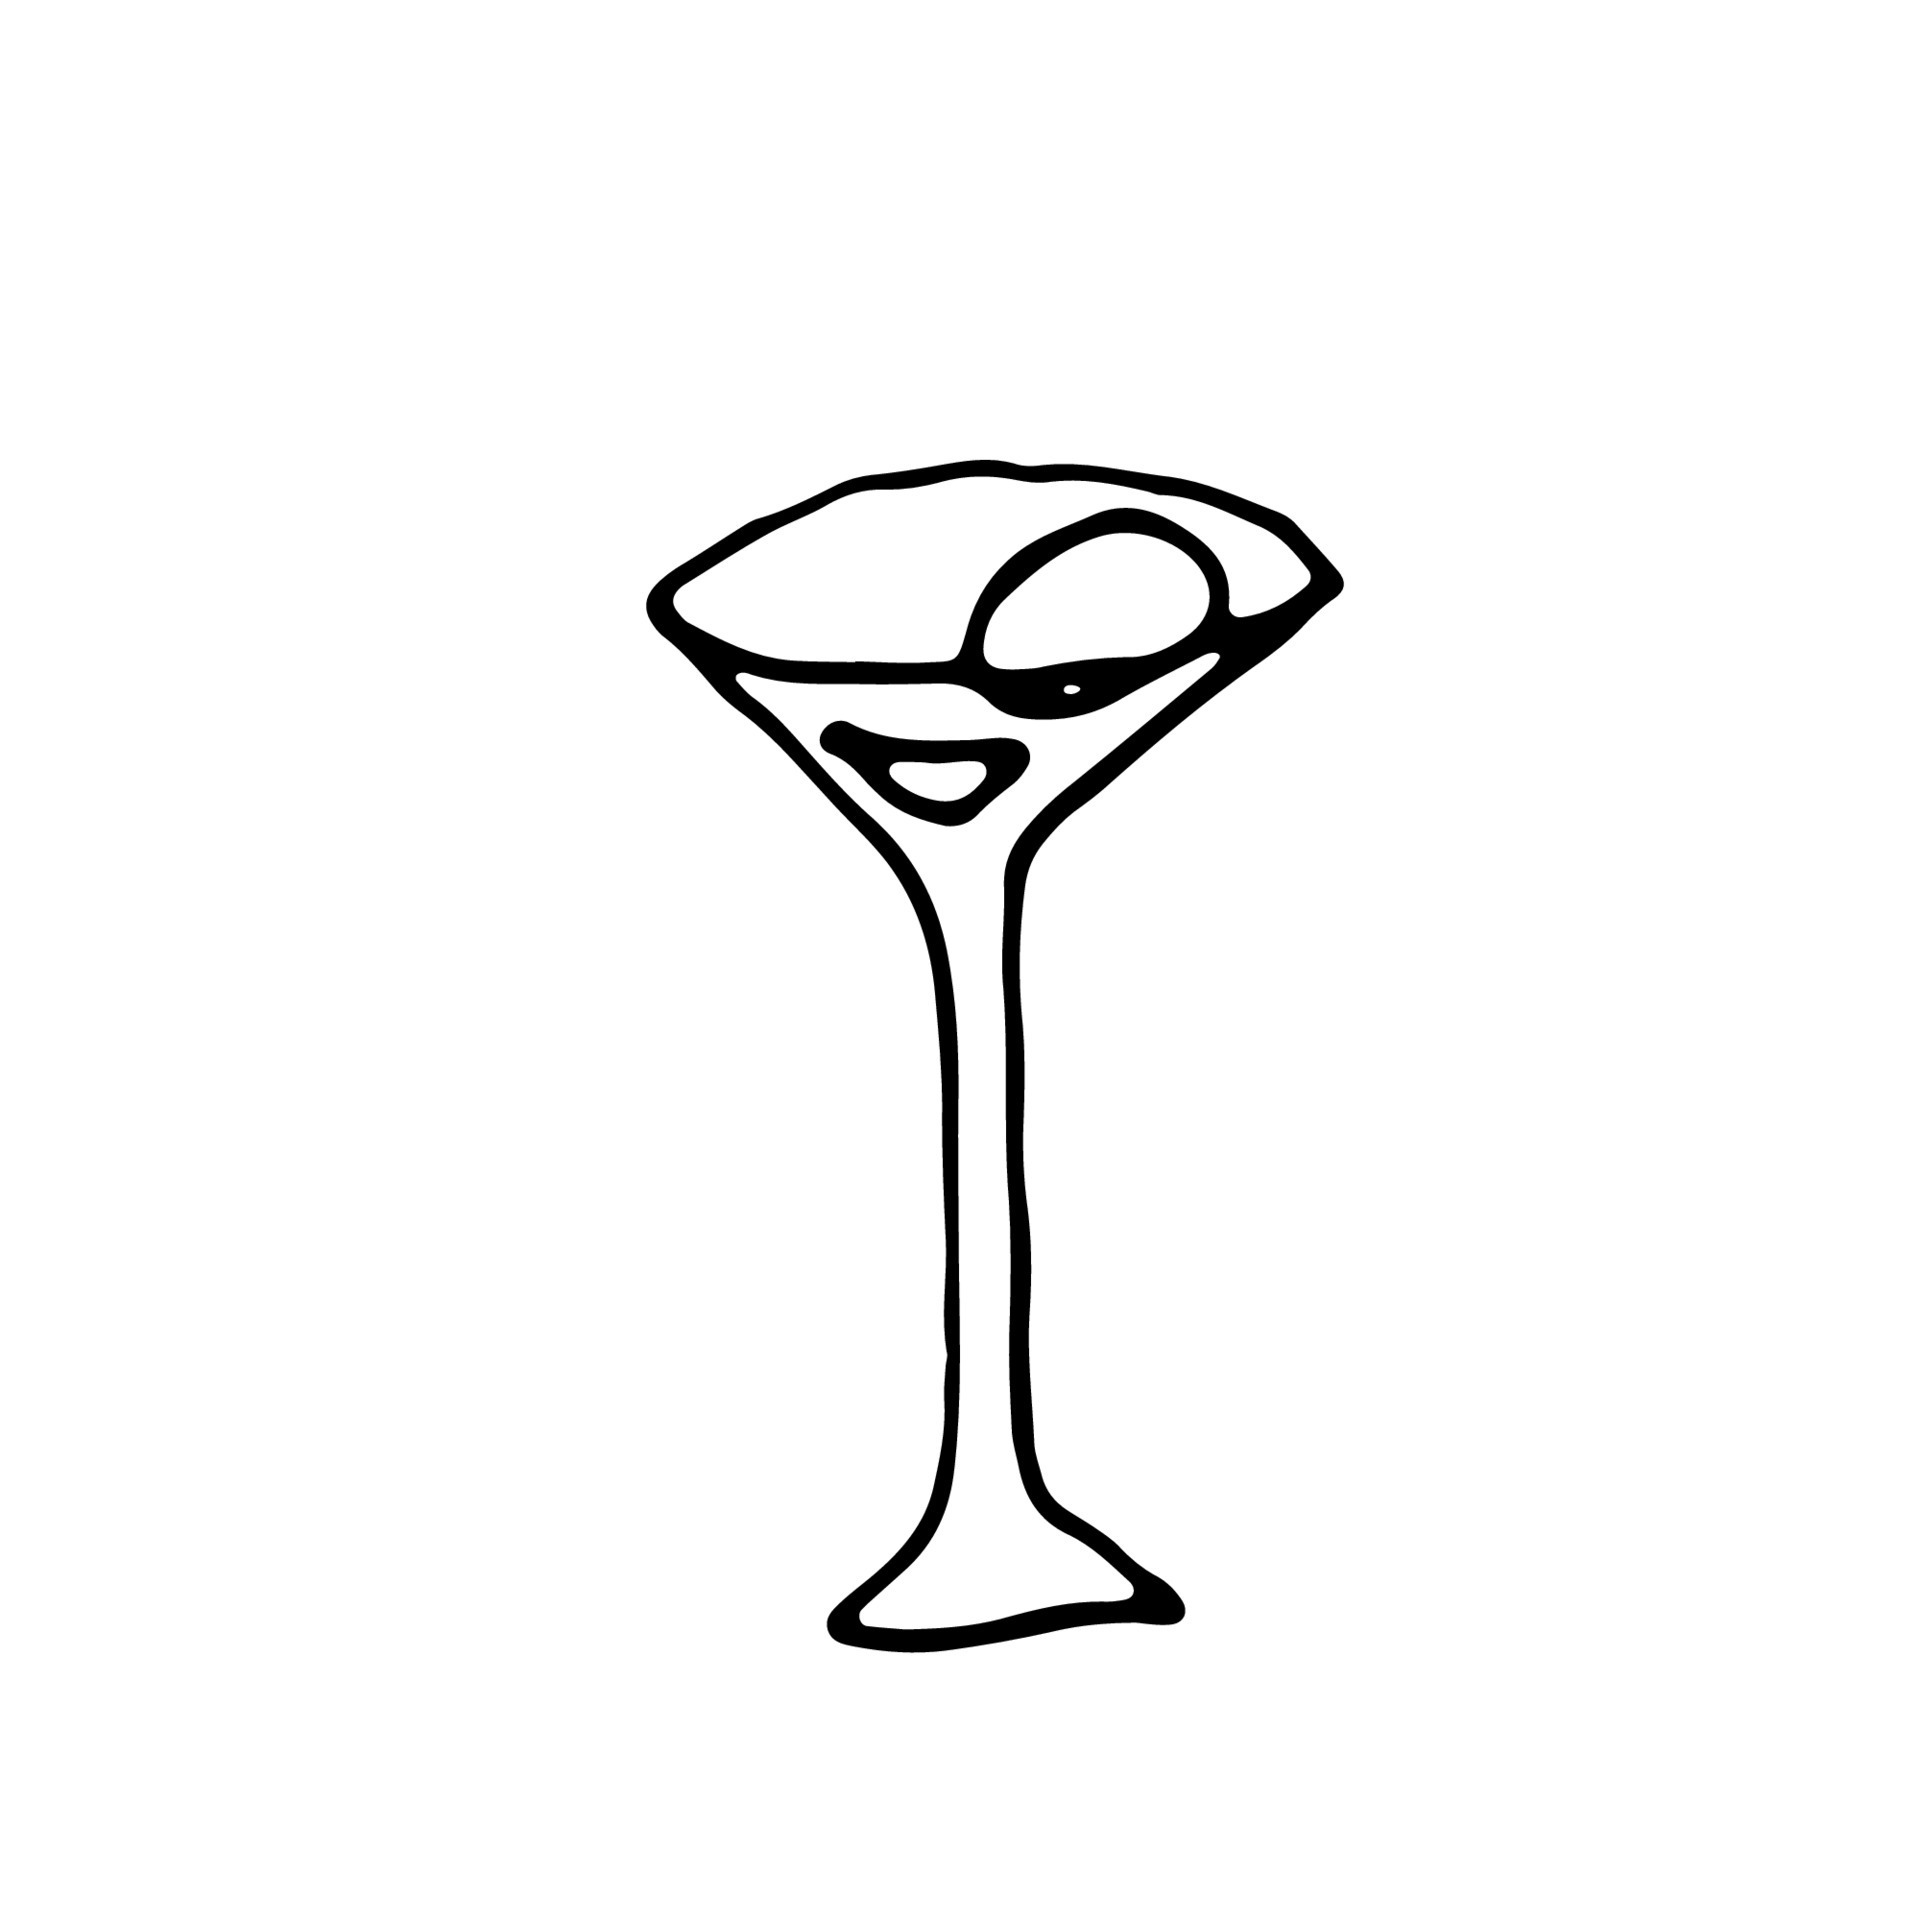 https://static.vecteezy.com/system/resources/previews/014/142/212/original/drink-dishes-martini-glass-line-art-hand-drawn-illustration-black-sketch-isolated-on-white-free-vector.jpg